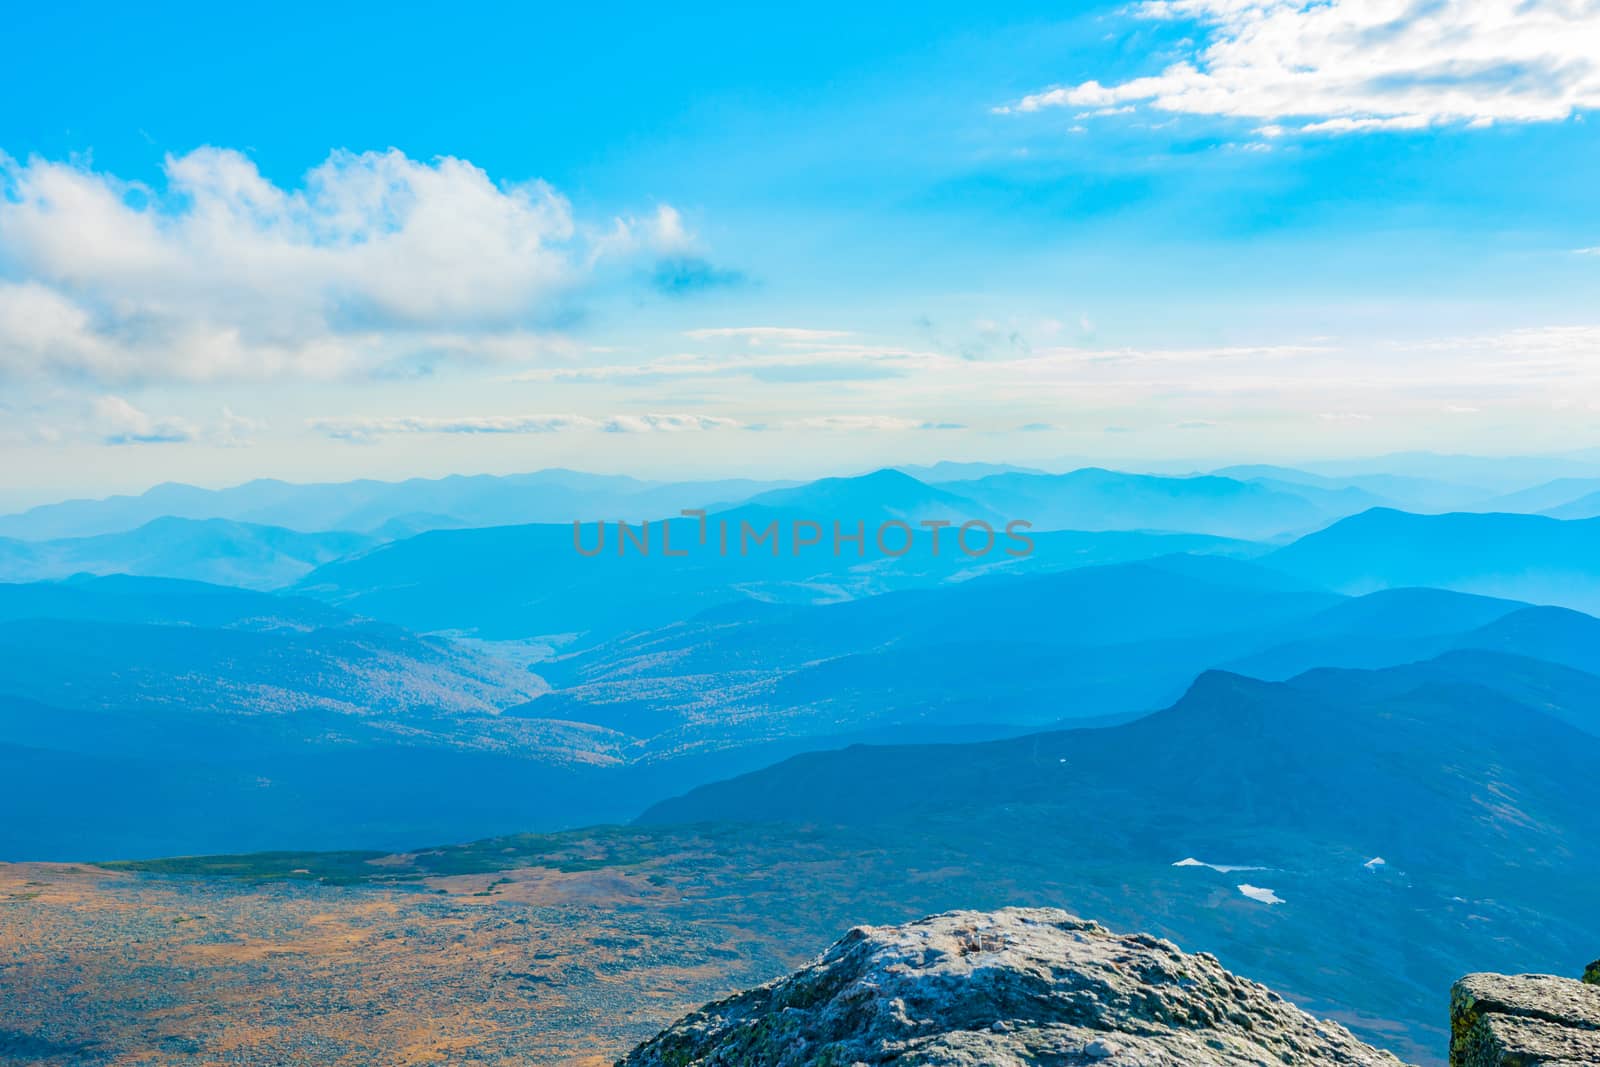 View from top of Mount Washington across mountainous landscape  by brians101